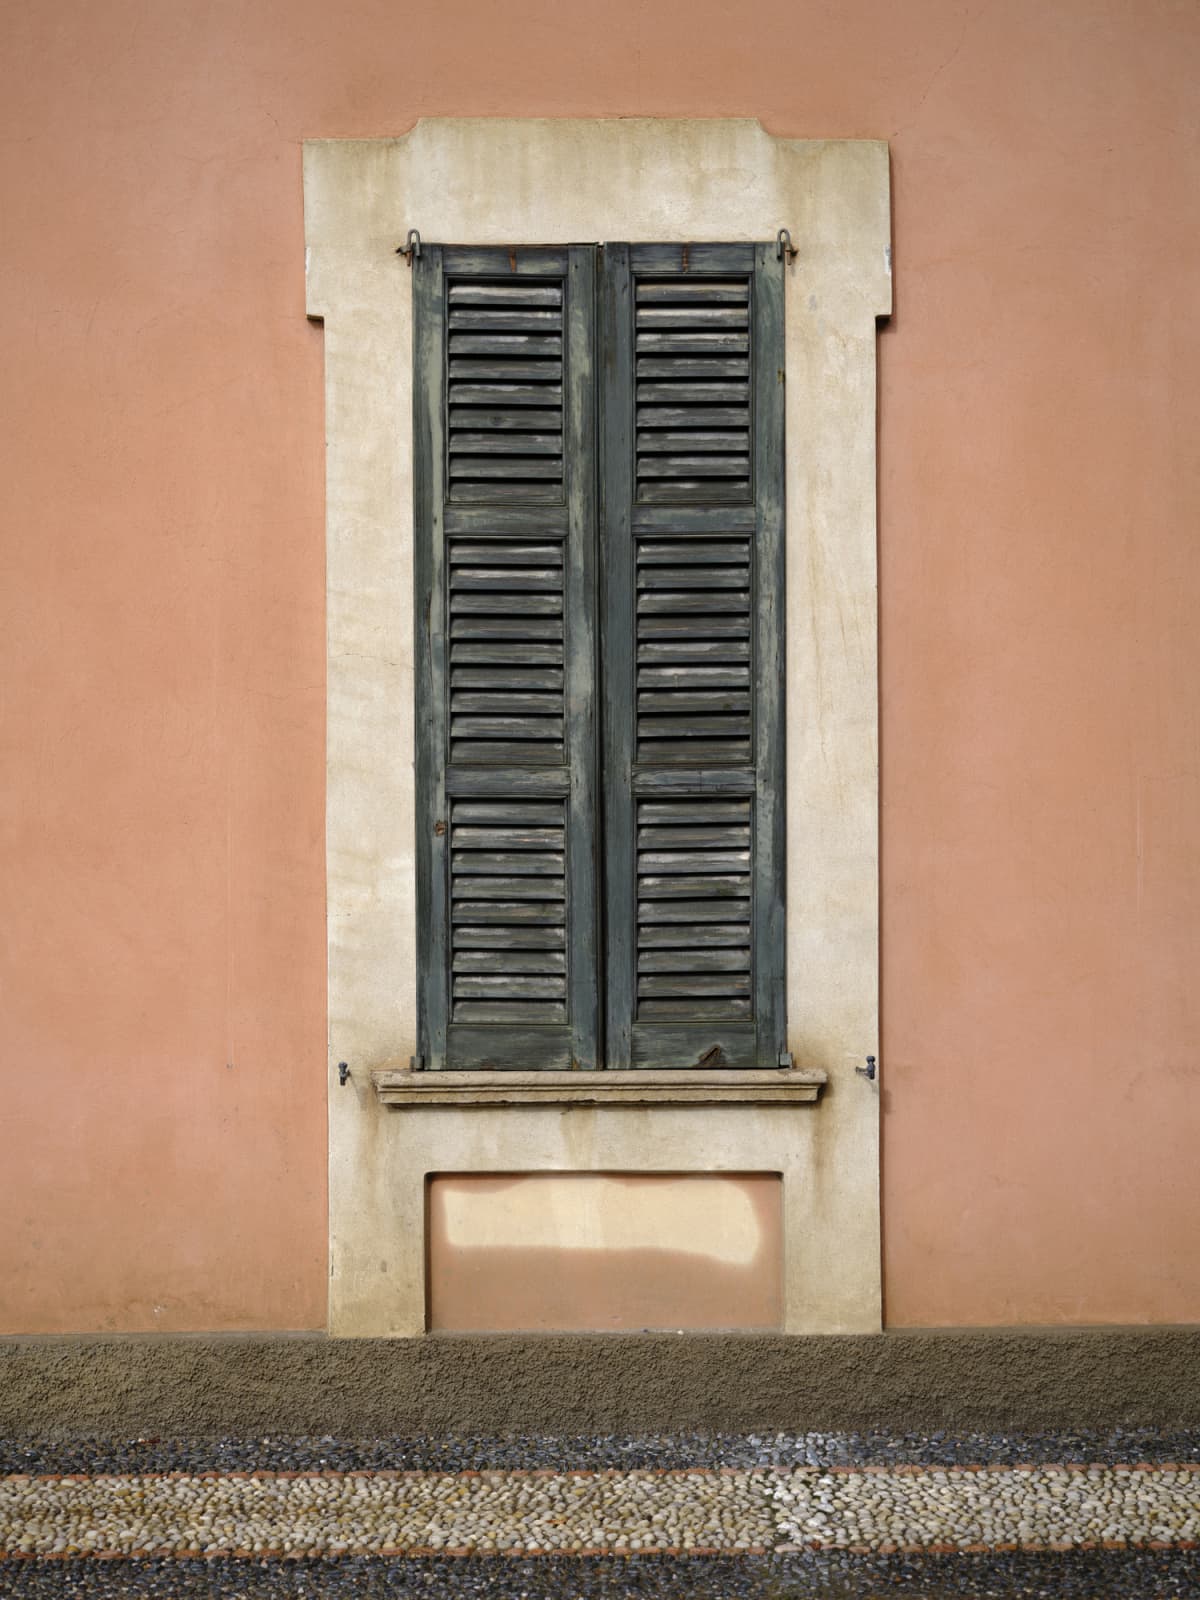 An old window with green shutters